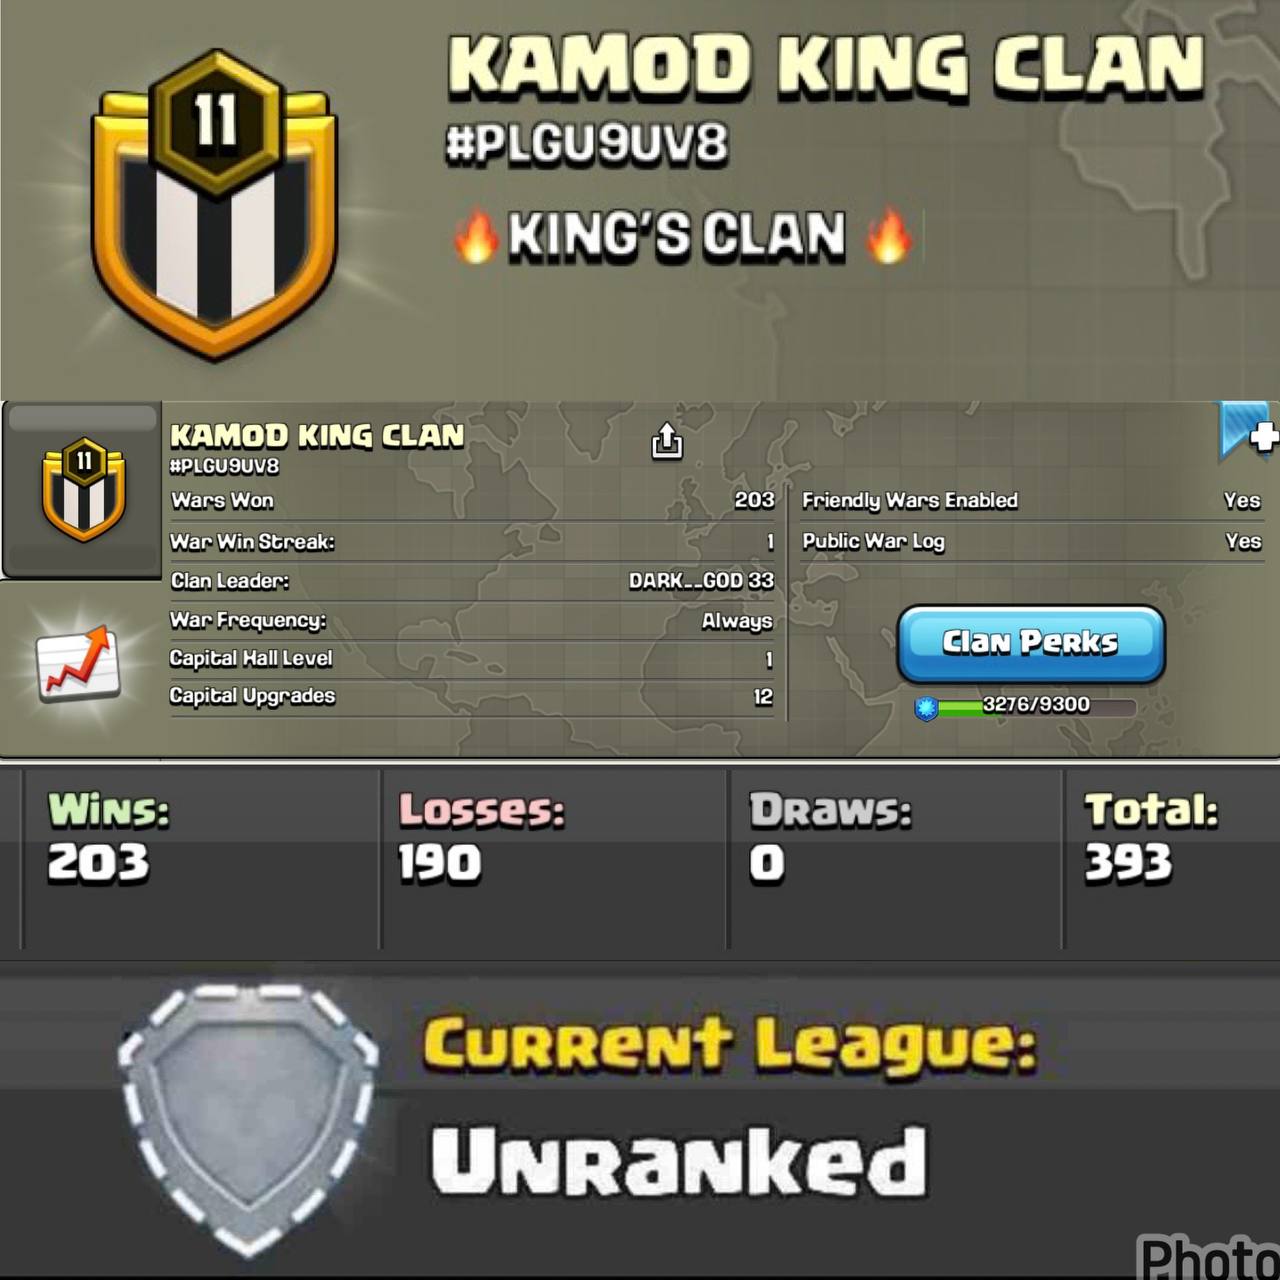 LEVEL- 11 | NAME - KAMOD KING CLAN |War Log Win- 203 : Loss- 190 | NAME CHAMGED IN PAST| Cwl League - UNRANKED  |AMAZING NAME & WAR LOG | 